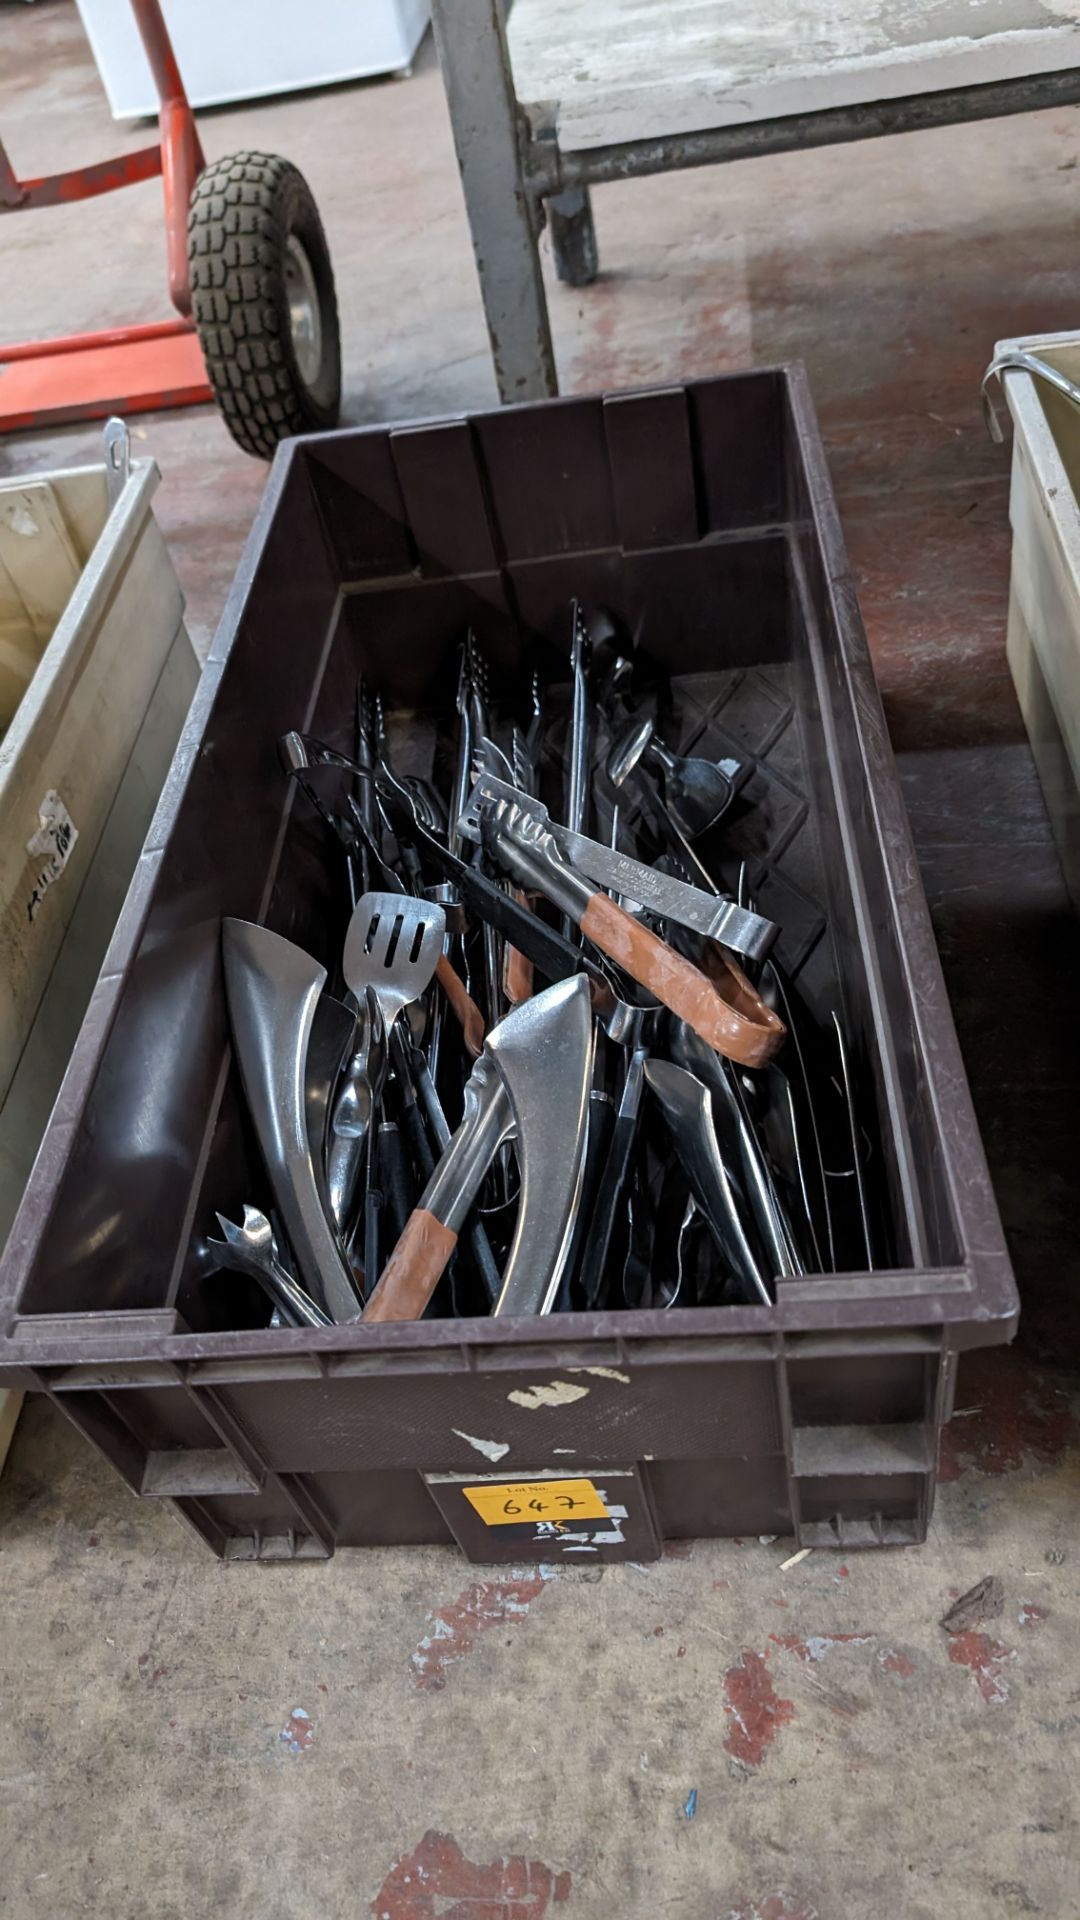 The contents of a crate of assorted tongs and other utensils